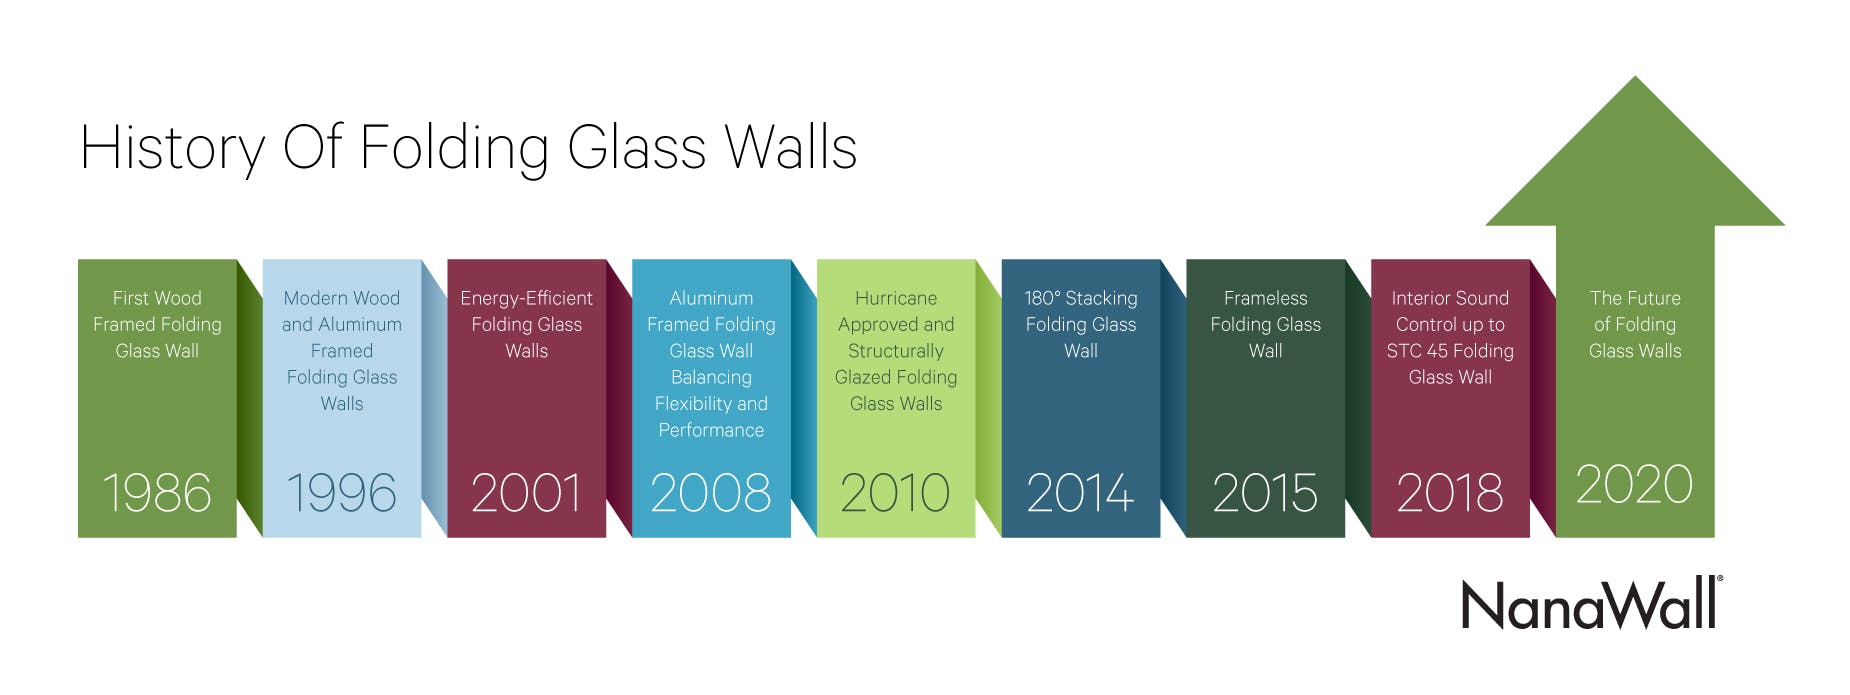 the history of folding glass walls